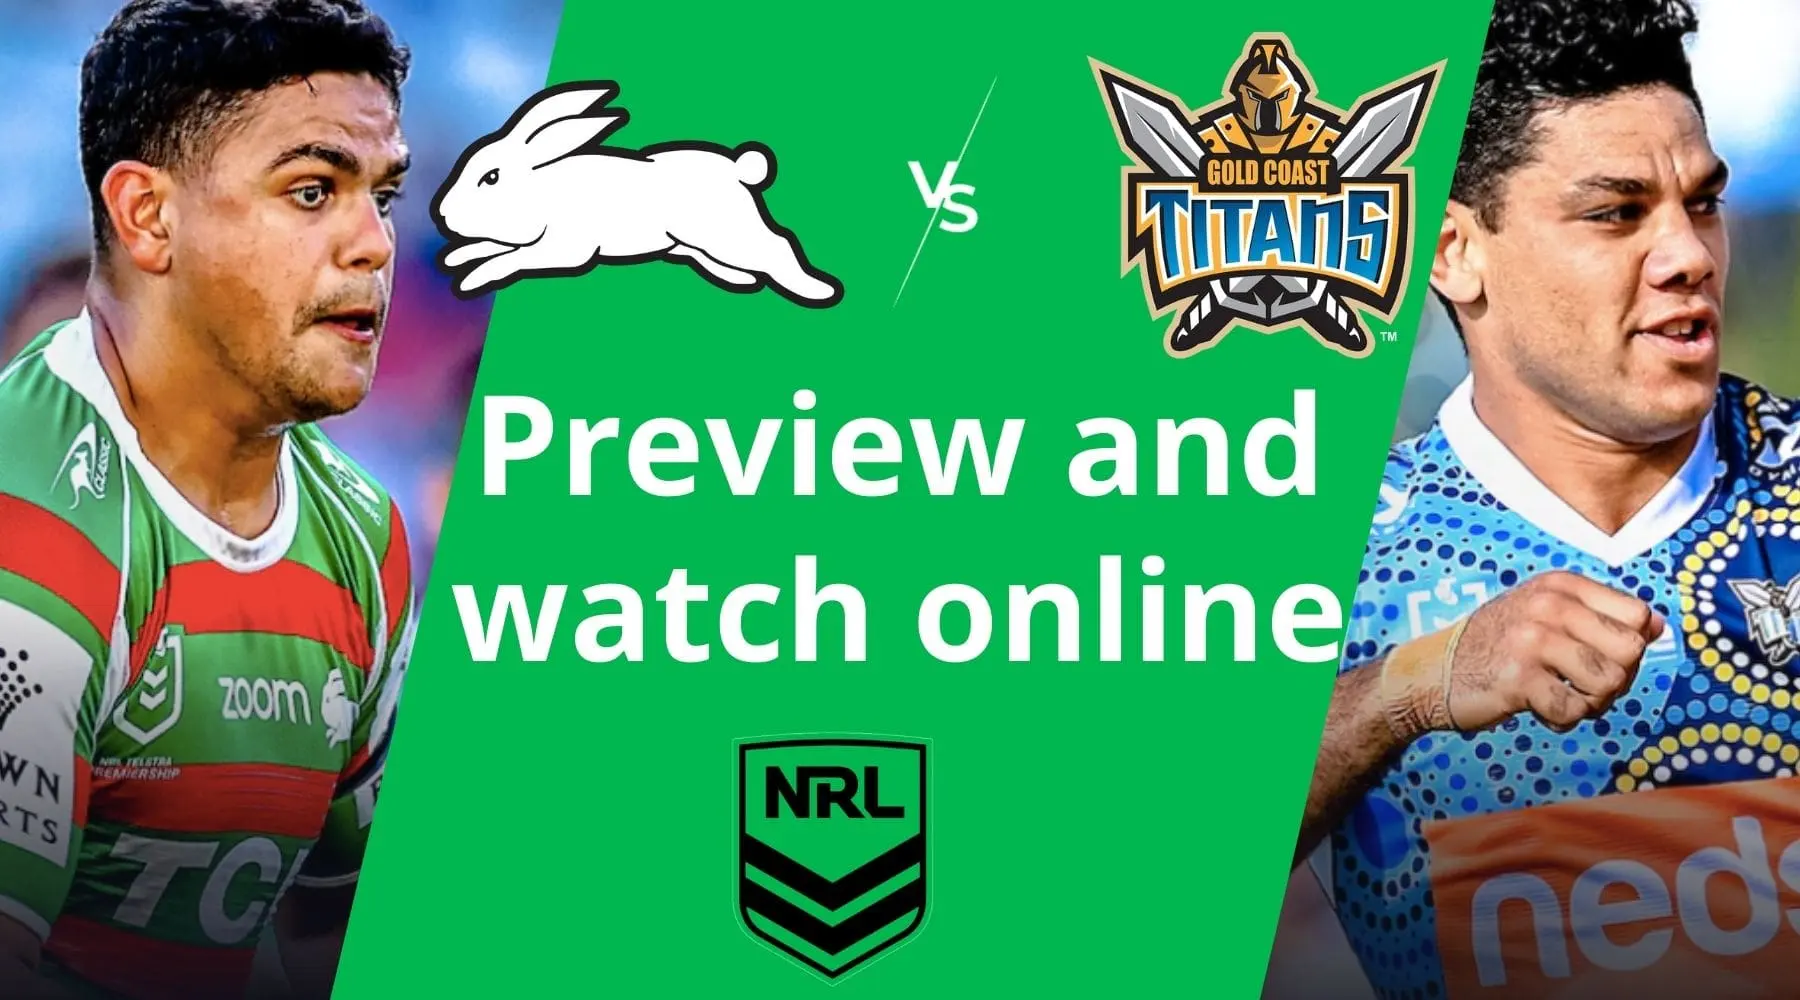 Watch Rabbitohs vs Titans NRL live online and match preview